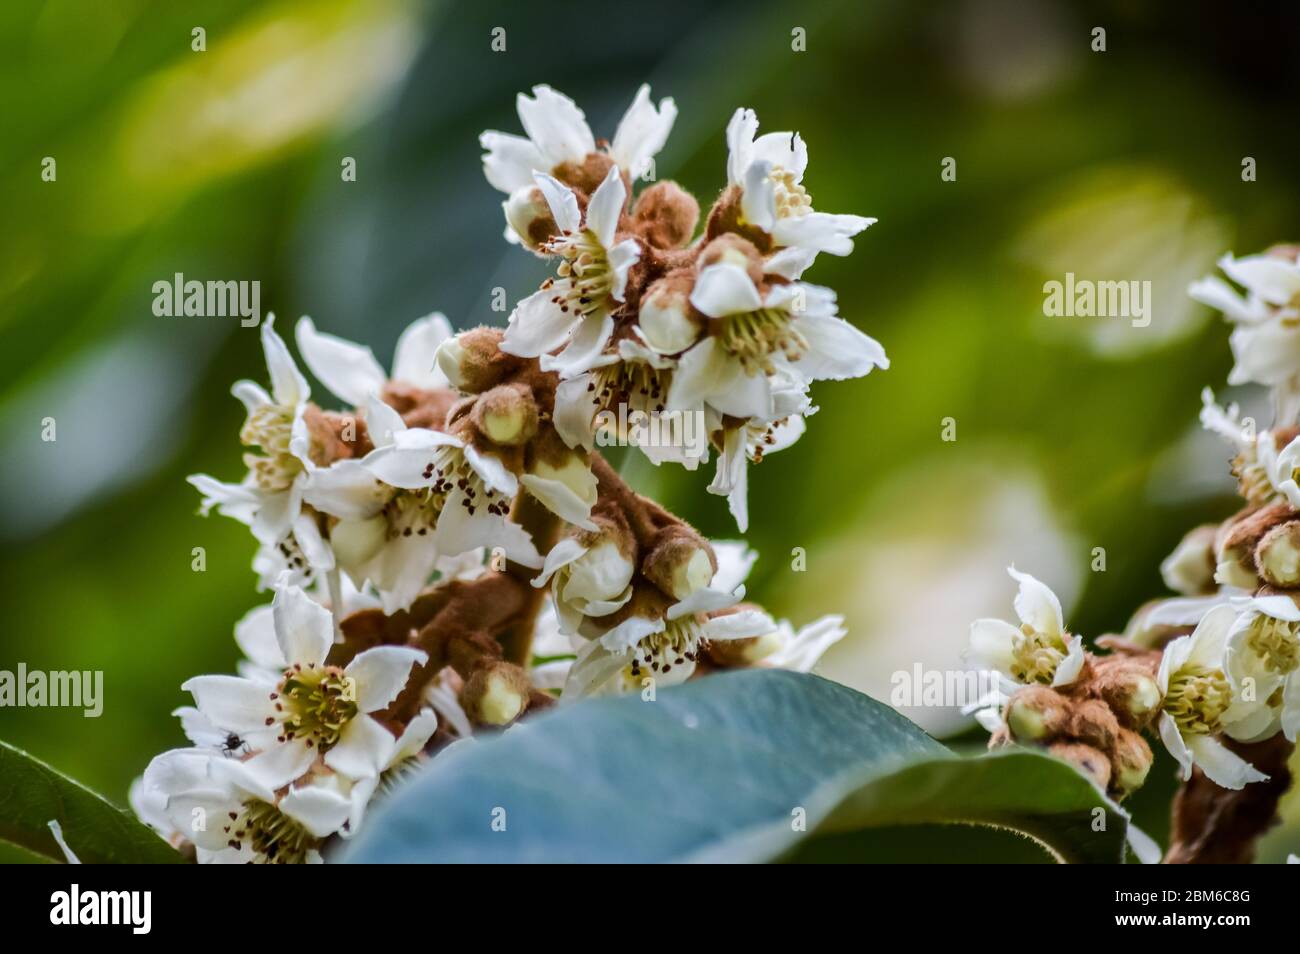 Loquat tree (Eriobotrya japonica) tree flowers blooming in autumn close up. Stock Photo